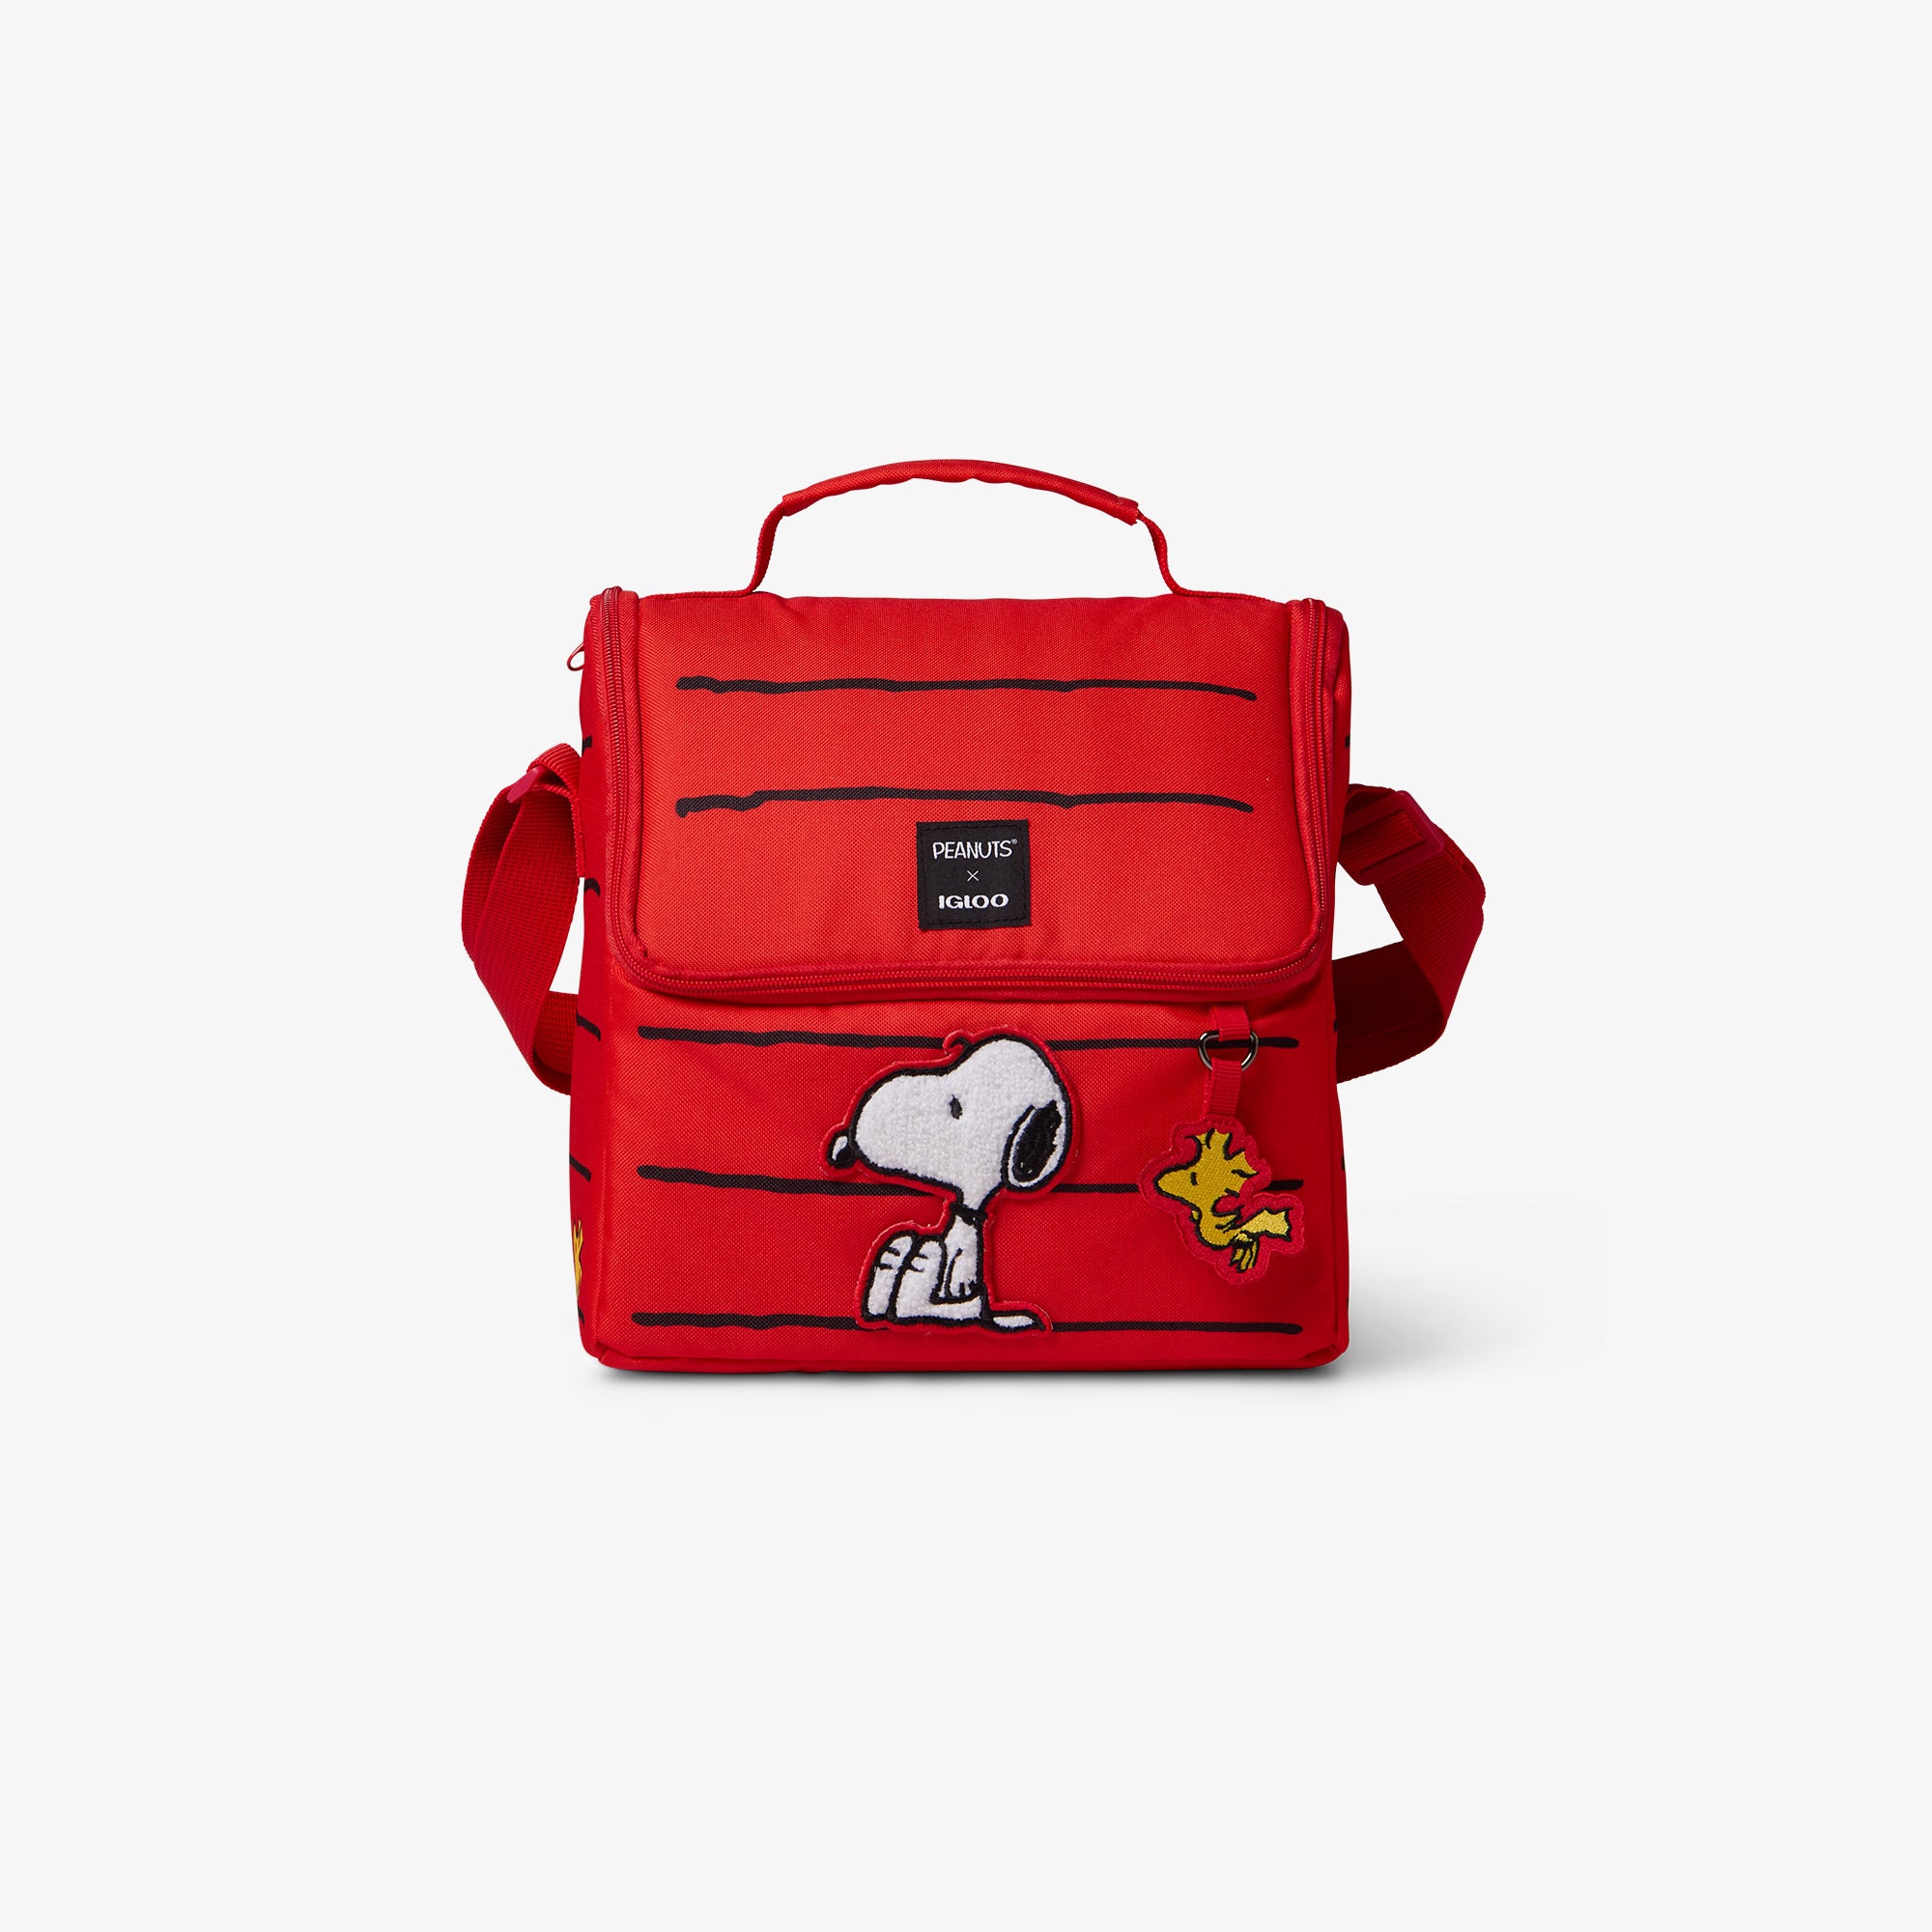 Snoopy's House 16-Can Lunch Pail | Igloo